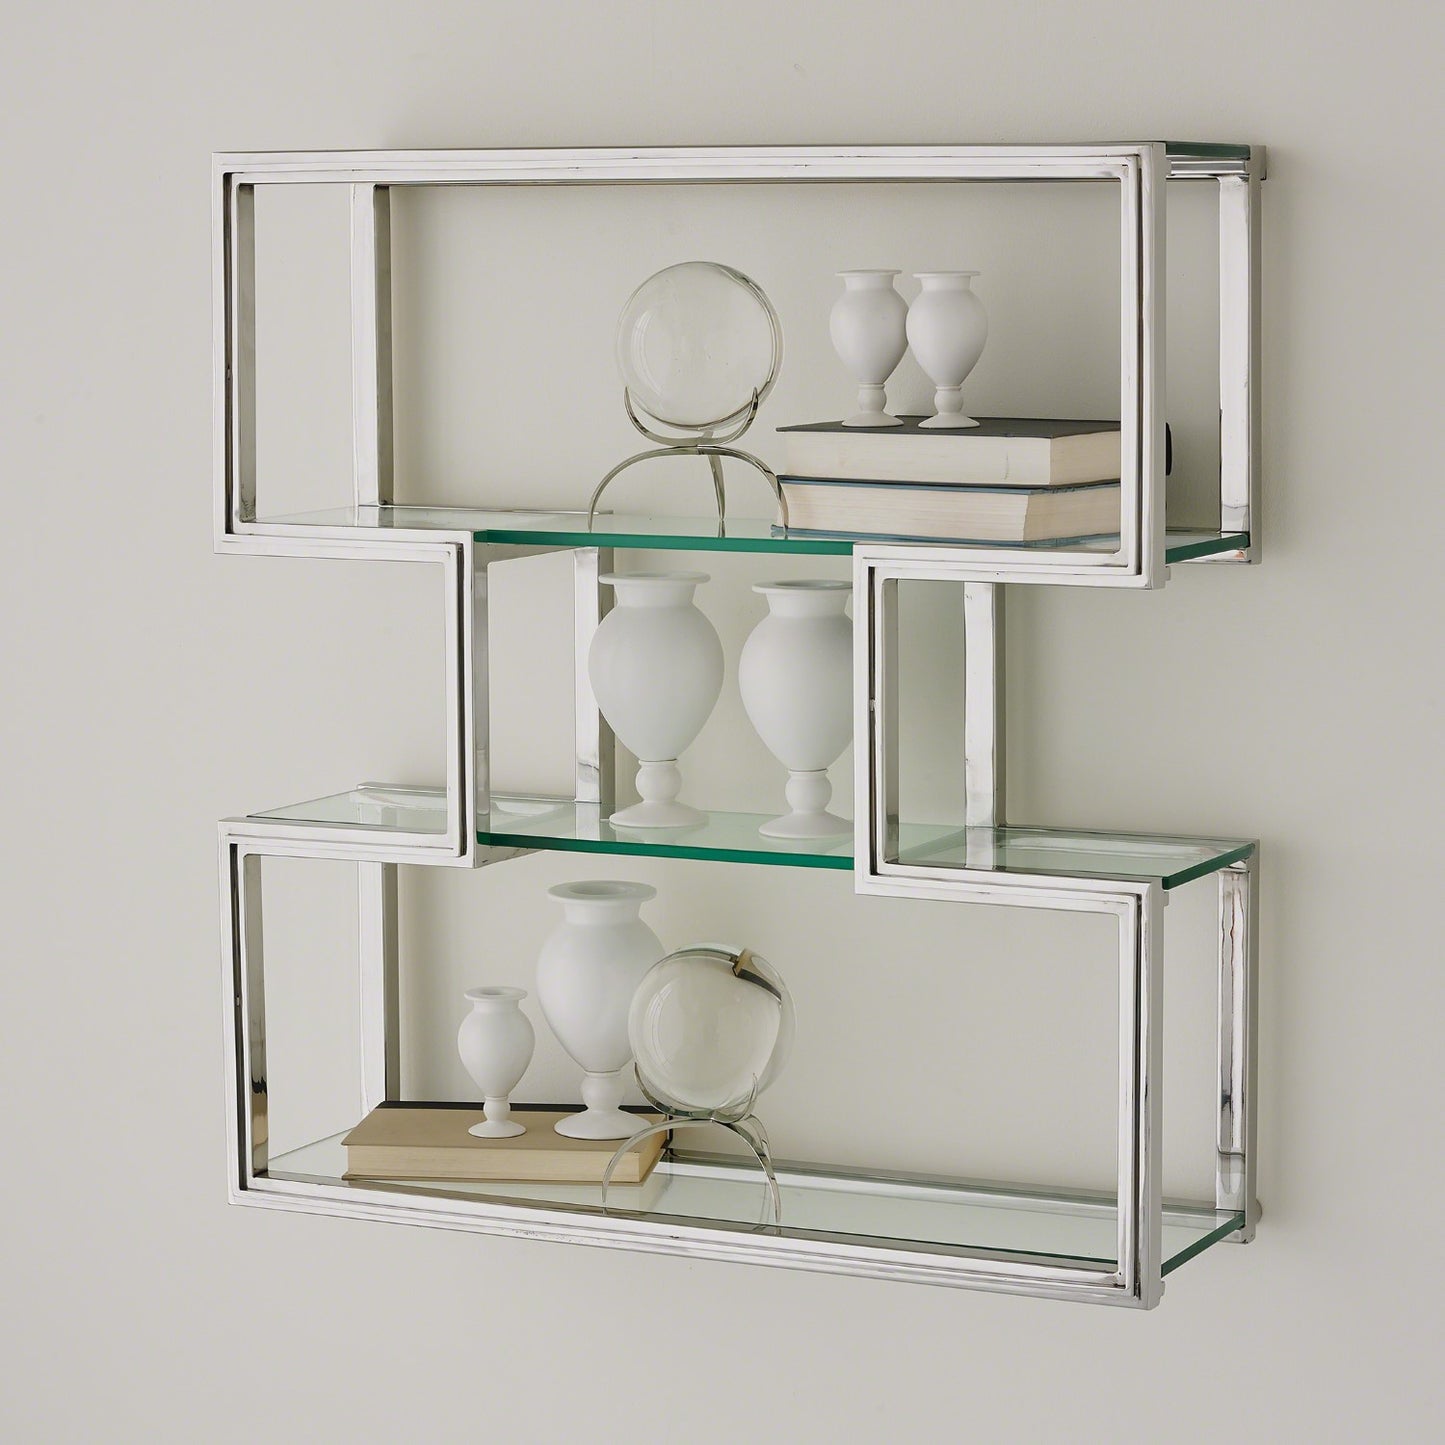 One Up Wall Shelf - Stainless Steel - Grats Decor Interior Design & Build Inc.